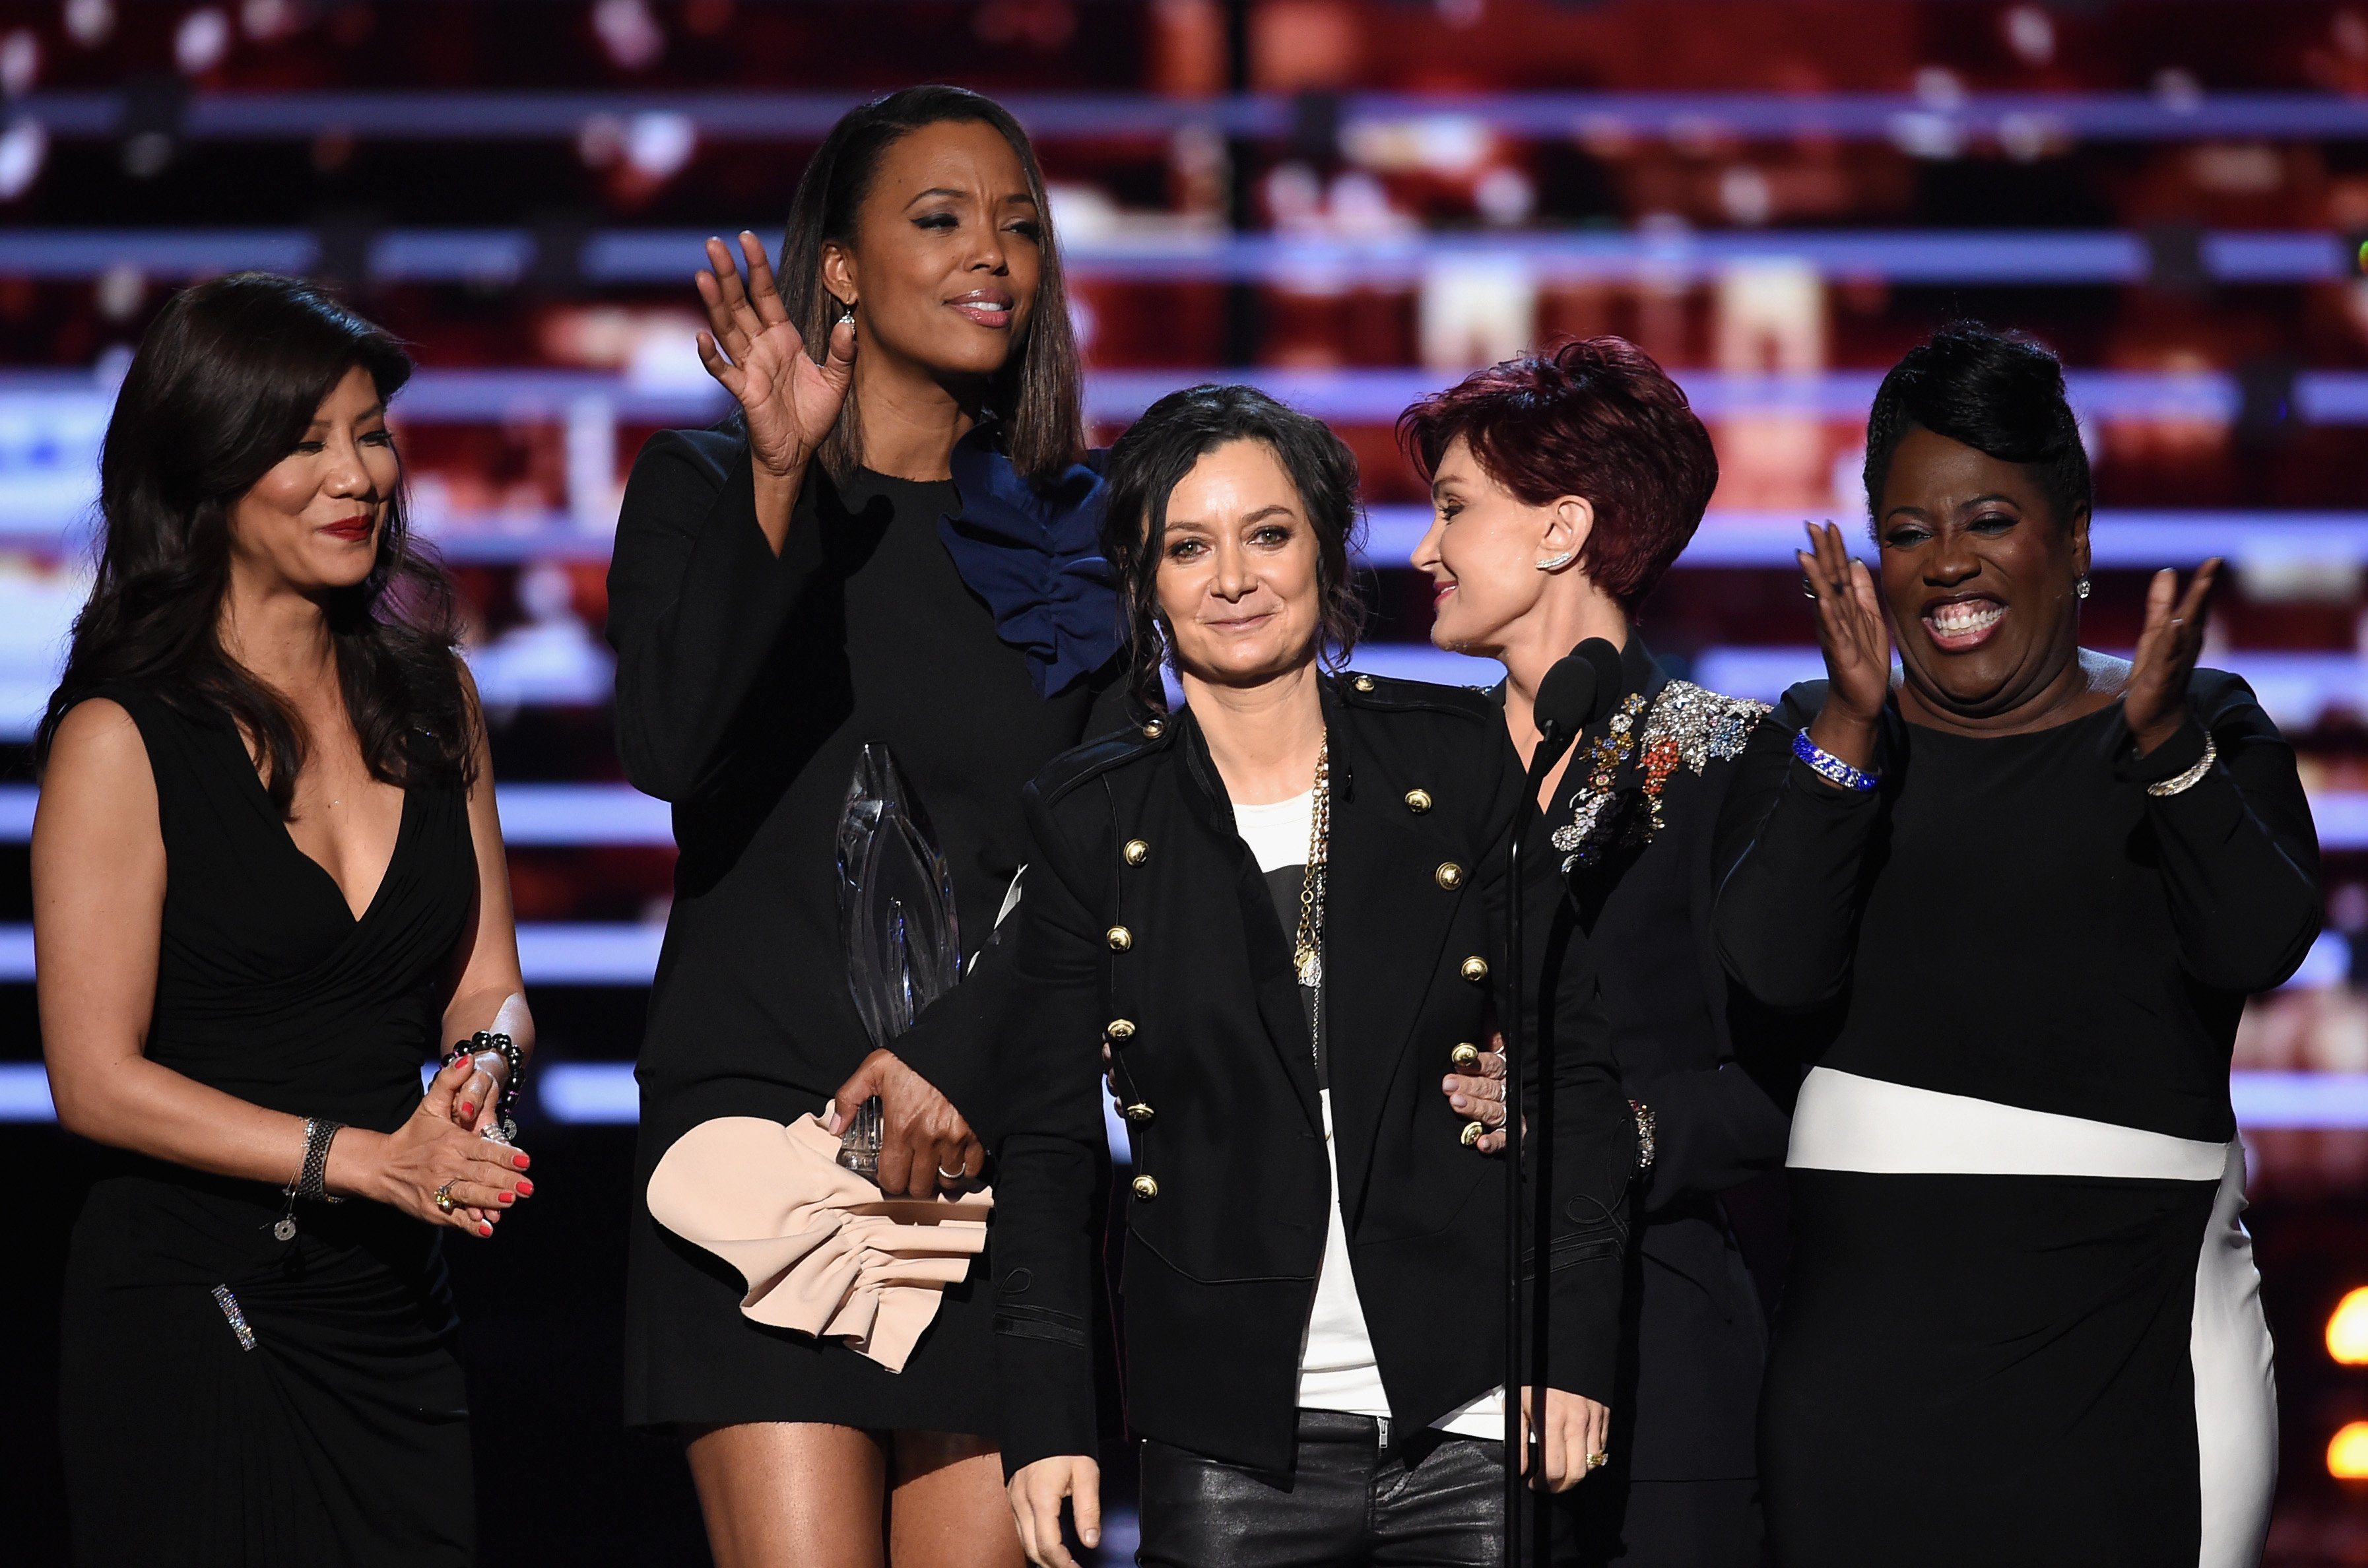 TV personalities Julie Chen, Aisha Tyler, Sara Gilbert, Sharon Osbourne, and Sheryl Underwood win the award for Favorite Daytime Talk Show Hosting Team for "The Talk" at the People's Choice Awards in Los Angeles on January 6, 2016 | Photo: Getty Images